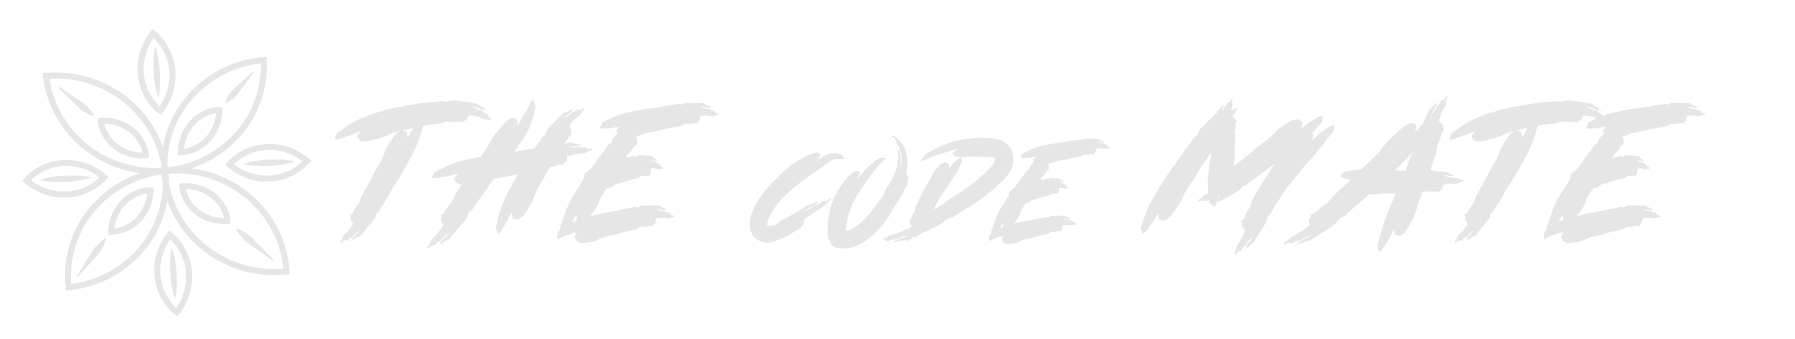 The code mate